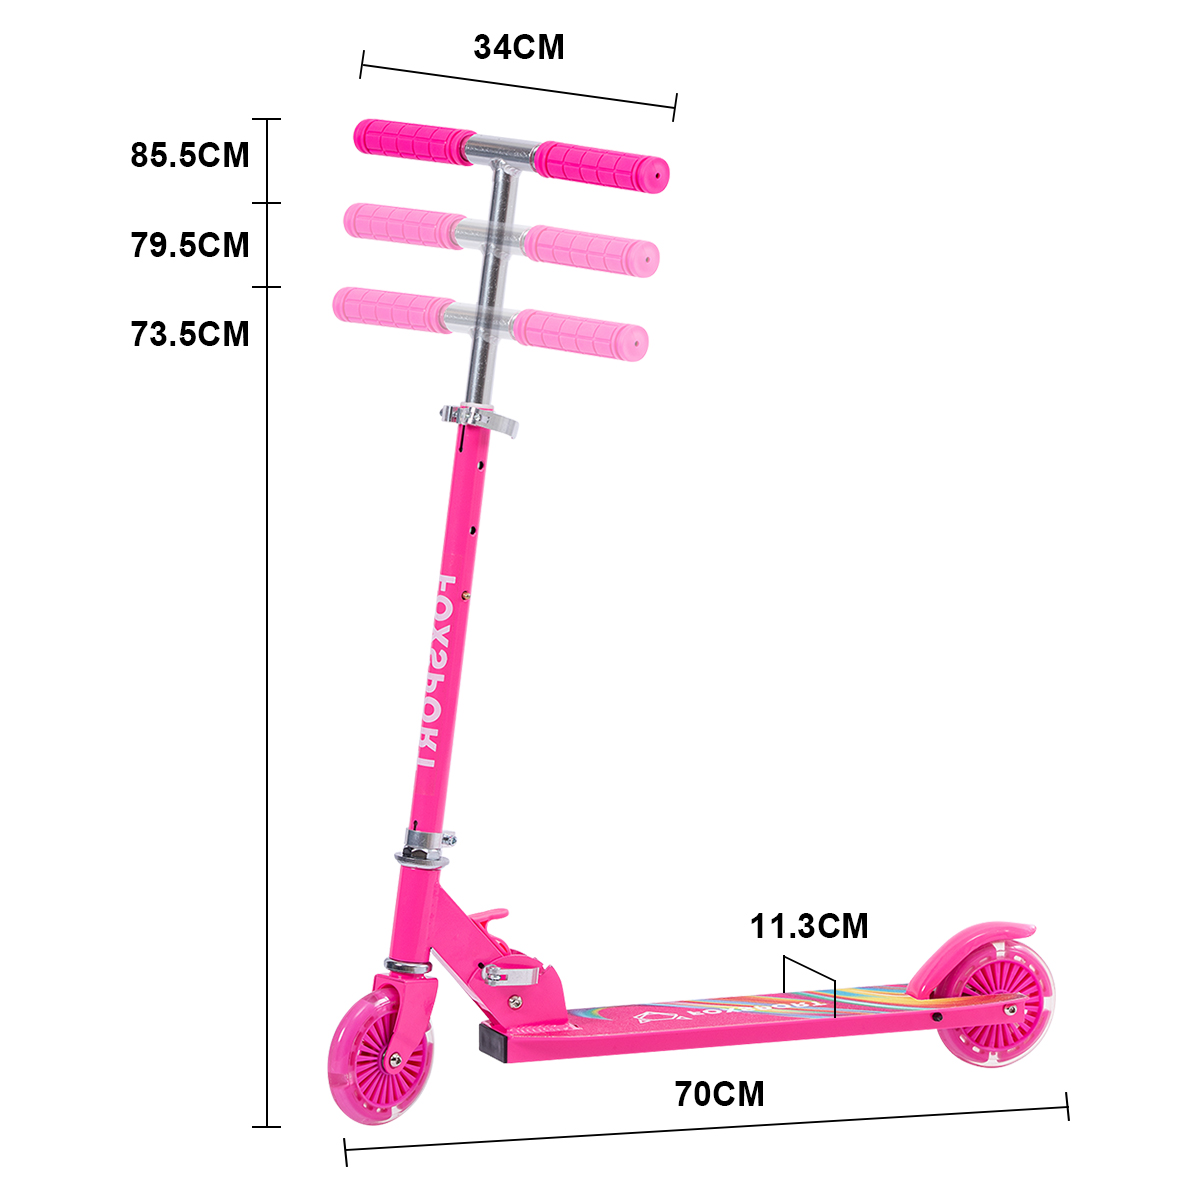 FOXSPORT Scooter Kinder Rosarot) A Rot Rosa (4,7 Zoll